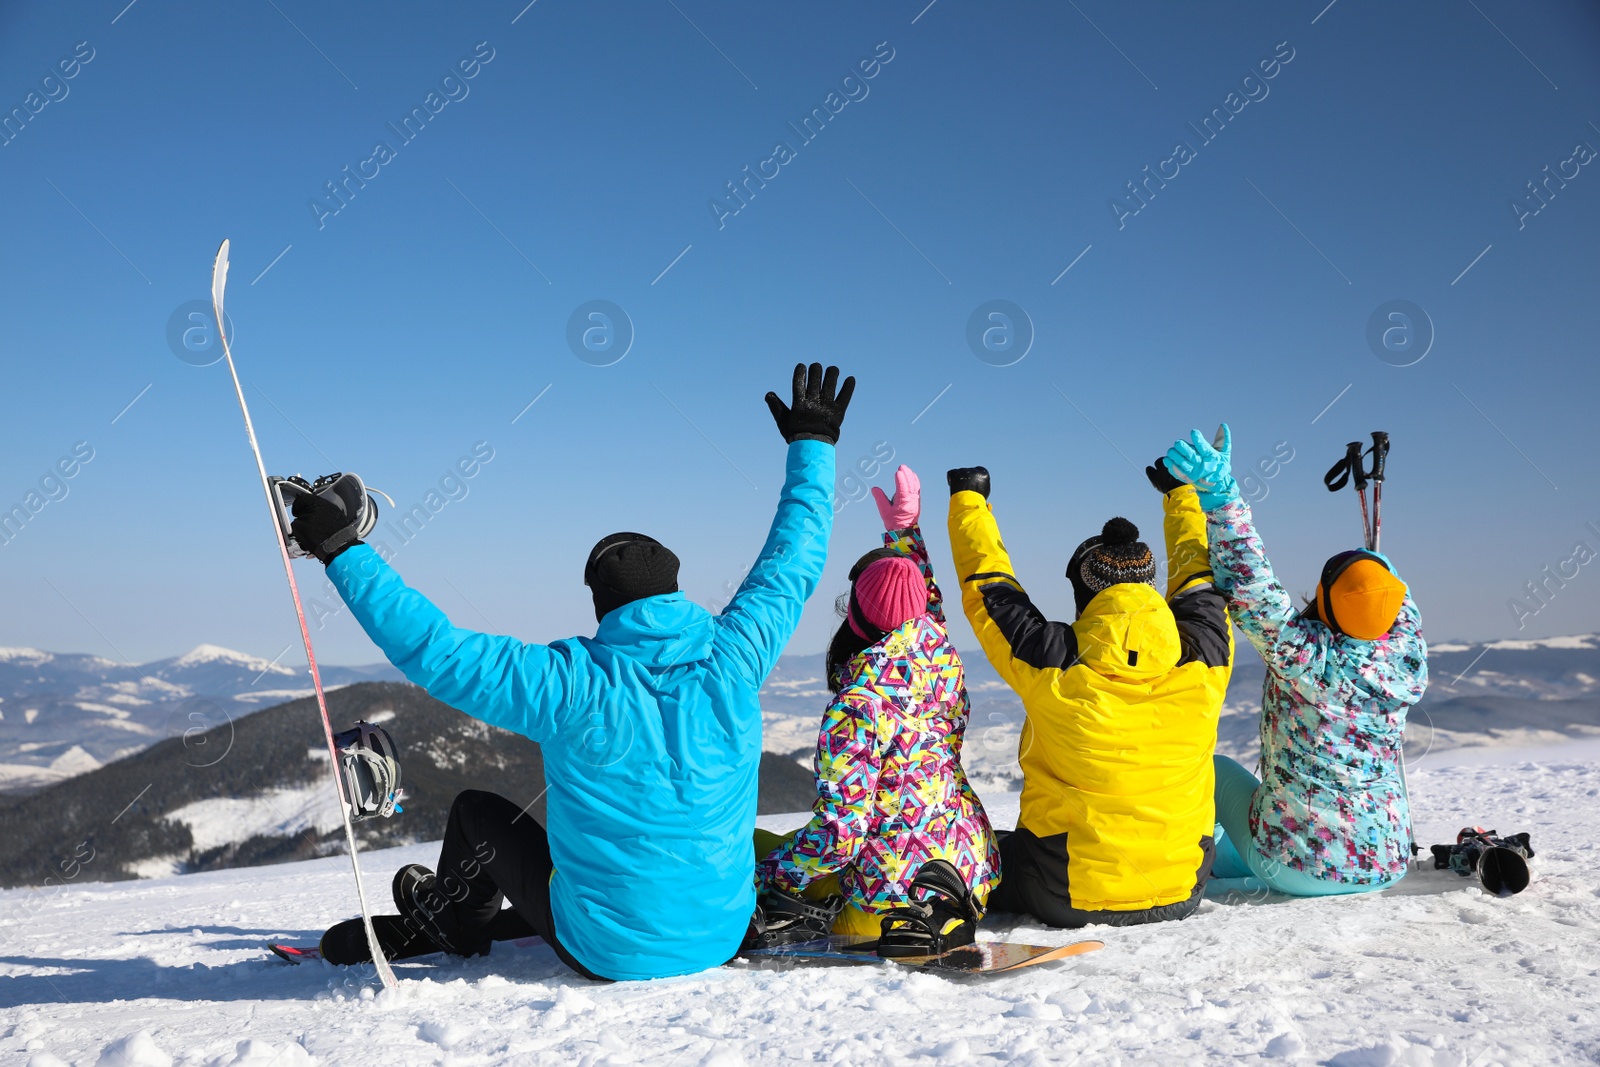 Photo of Group of friends with equipment at ski resort. Winter vacation